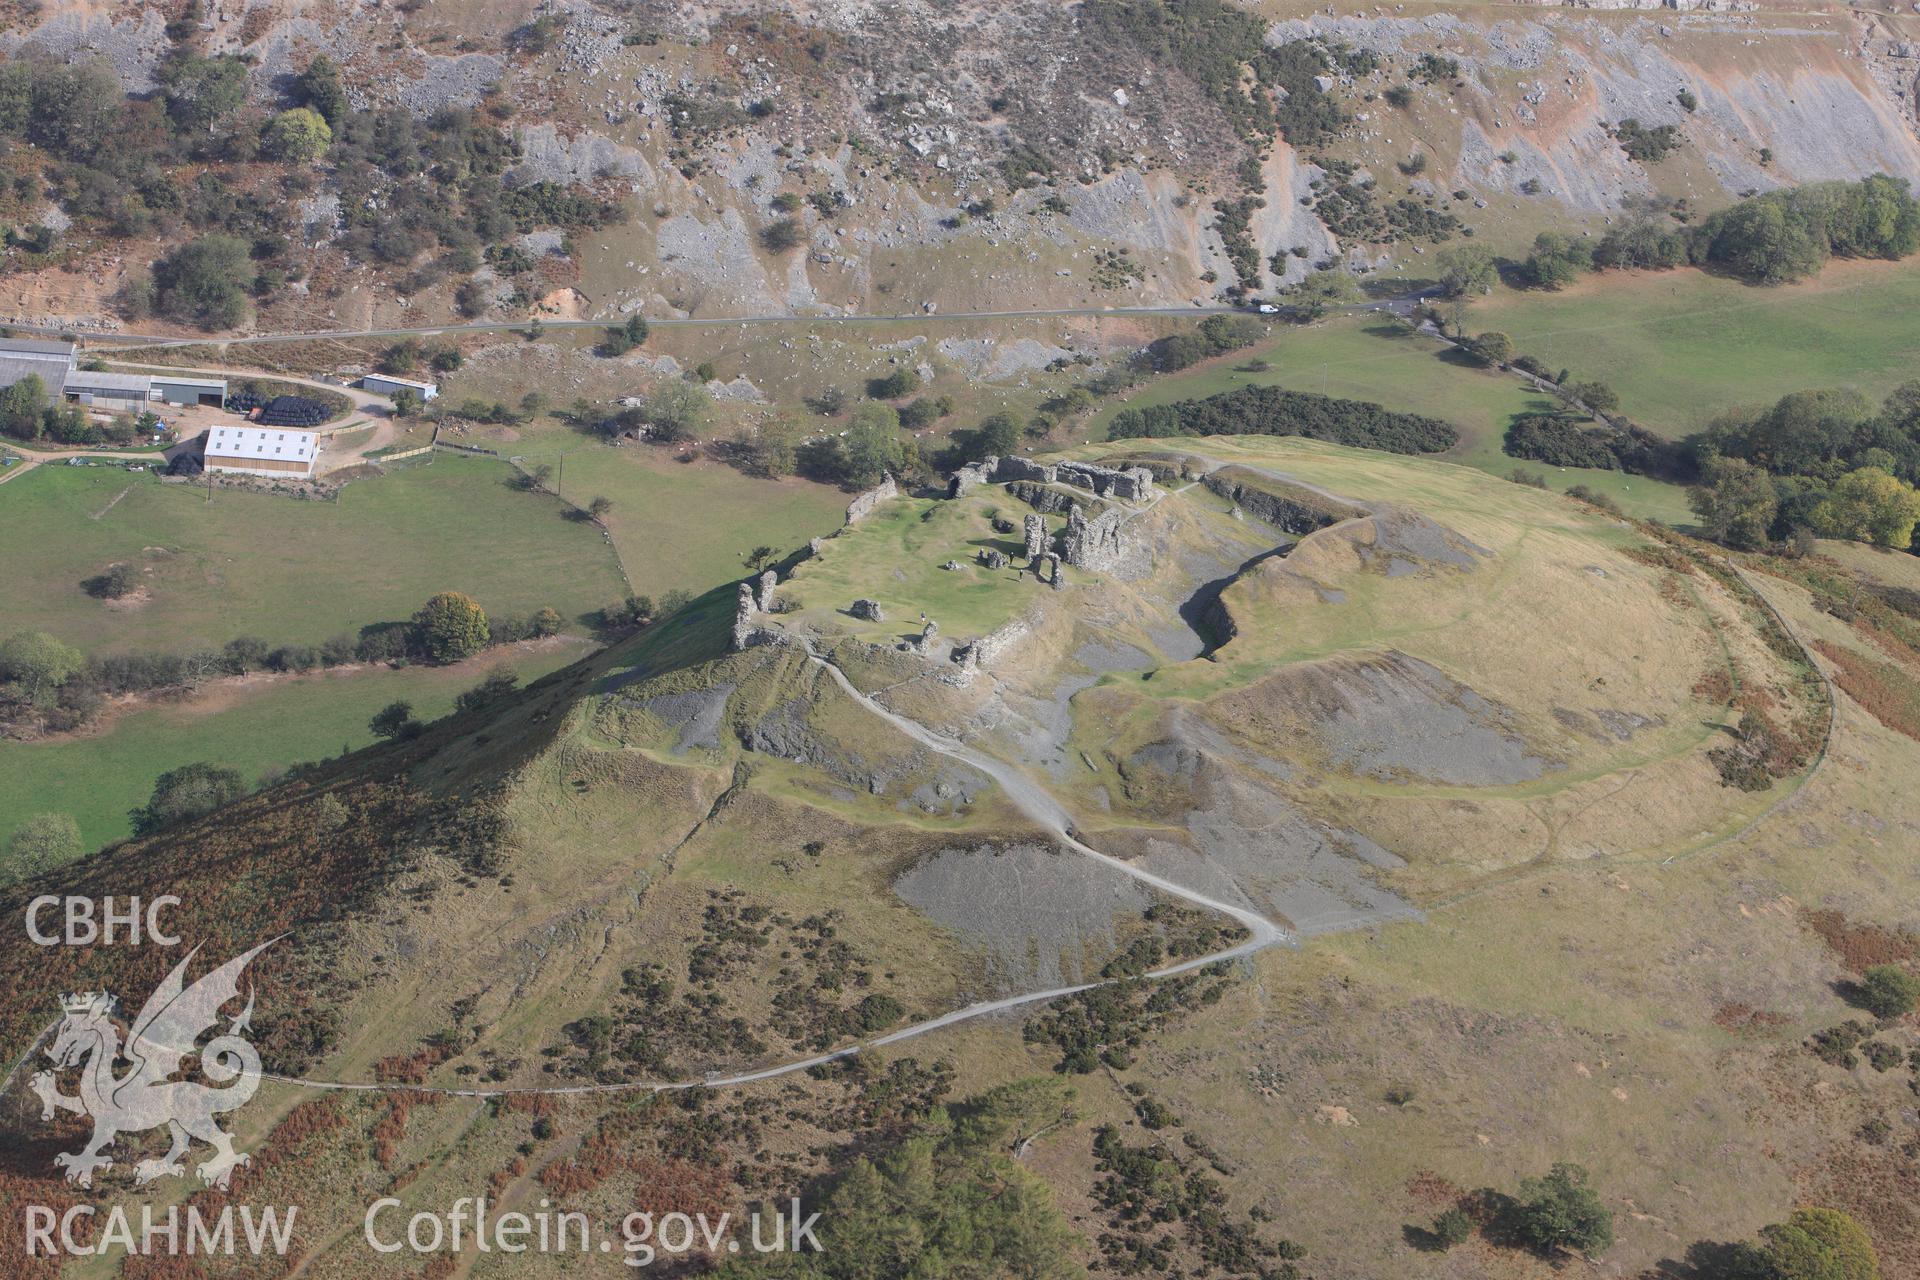 RCAHMW colour oblique photograph of Castell Dinas Bran. Taken by Toby Driver on 04/10/2011.